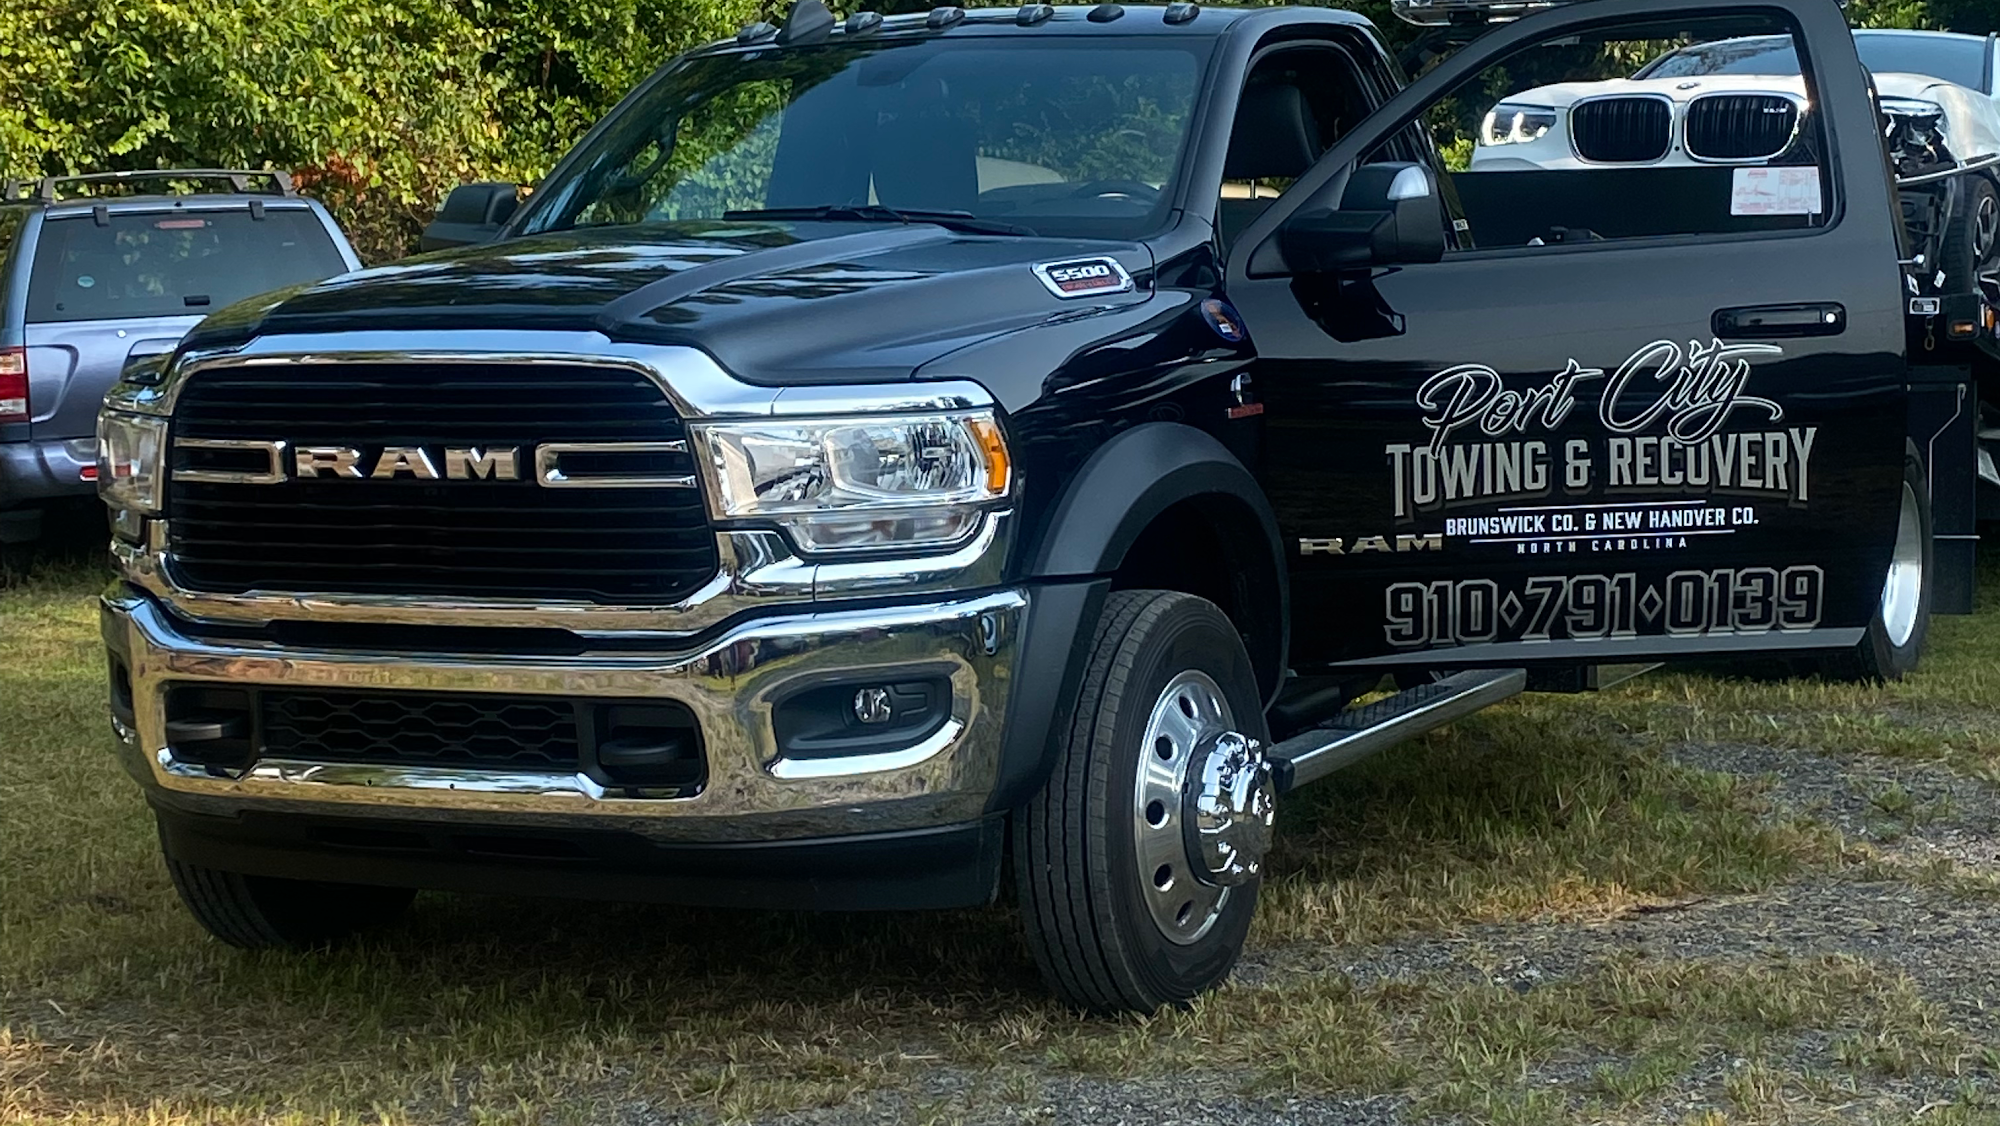 Port City Towing & Recovery